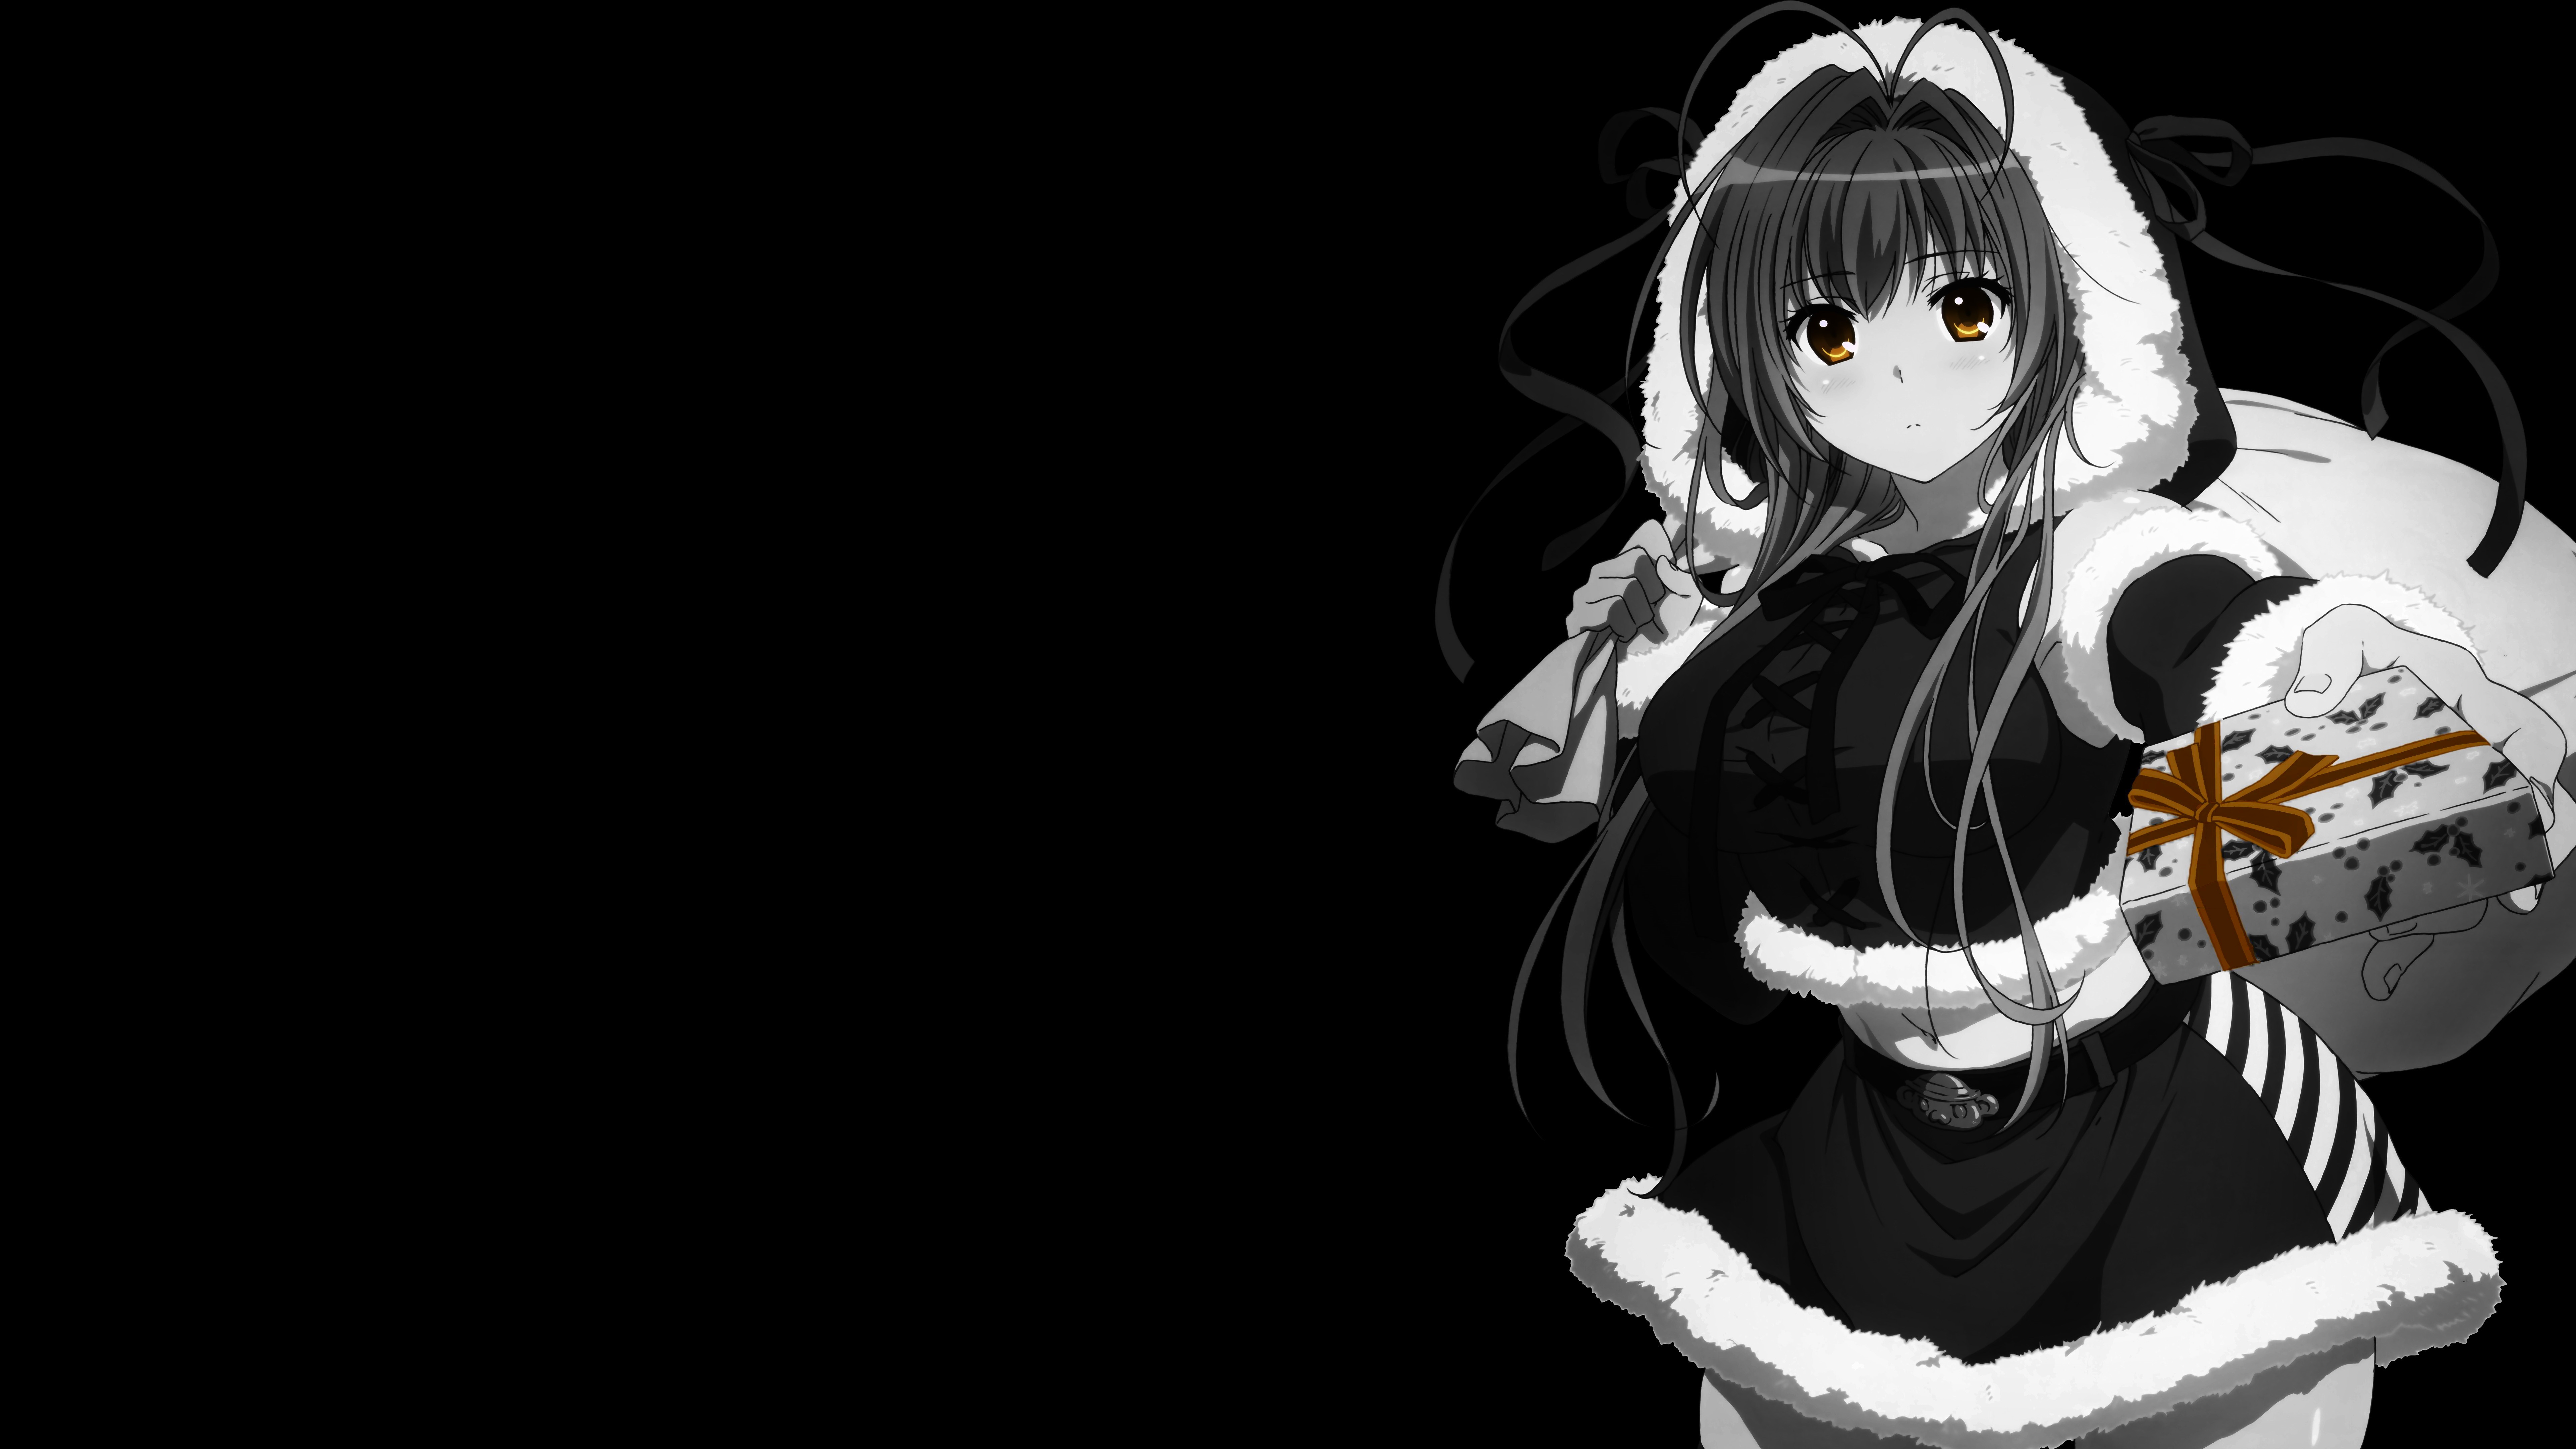 Anime 7680x4320 anime girls black background dark background simple background selective coloring Christmas clothes presents